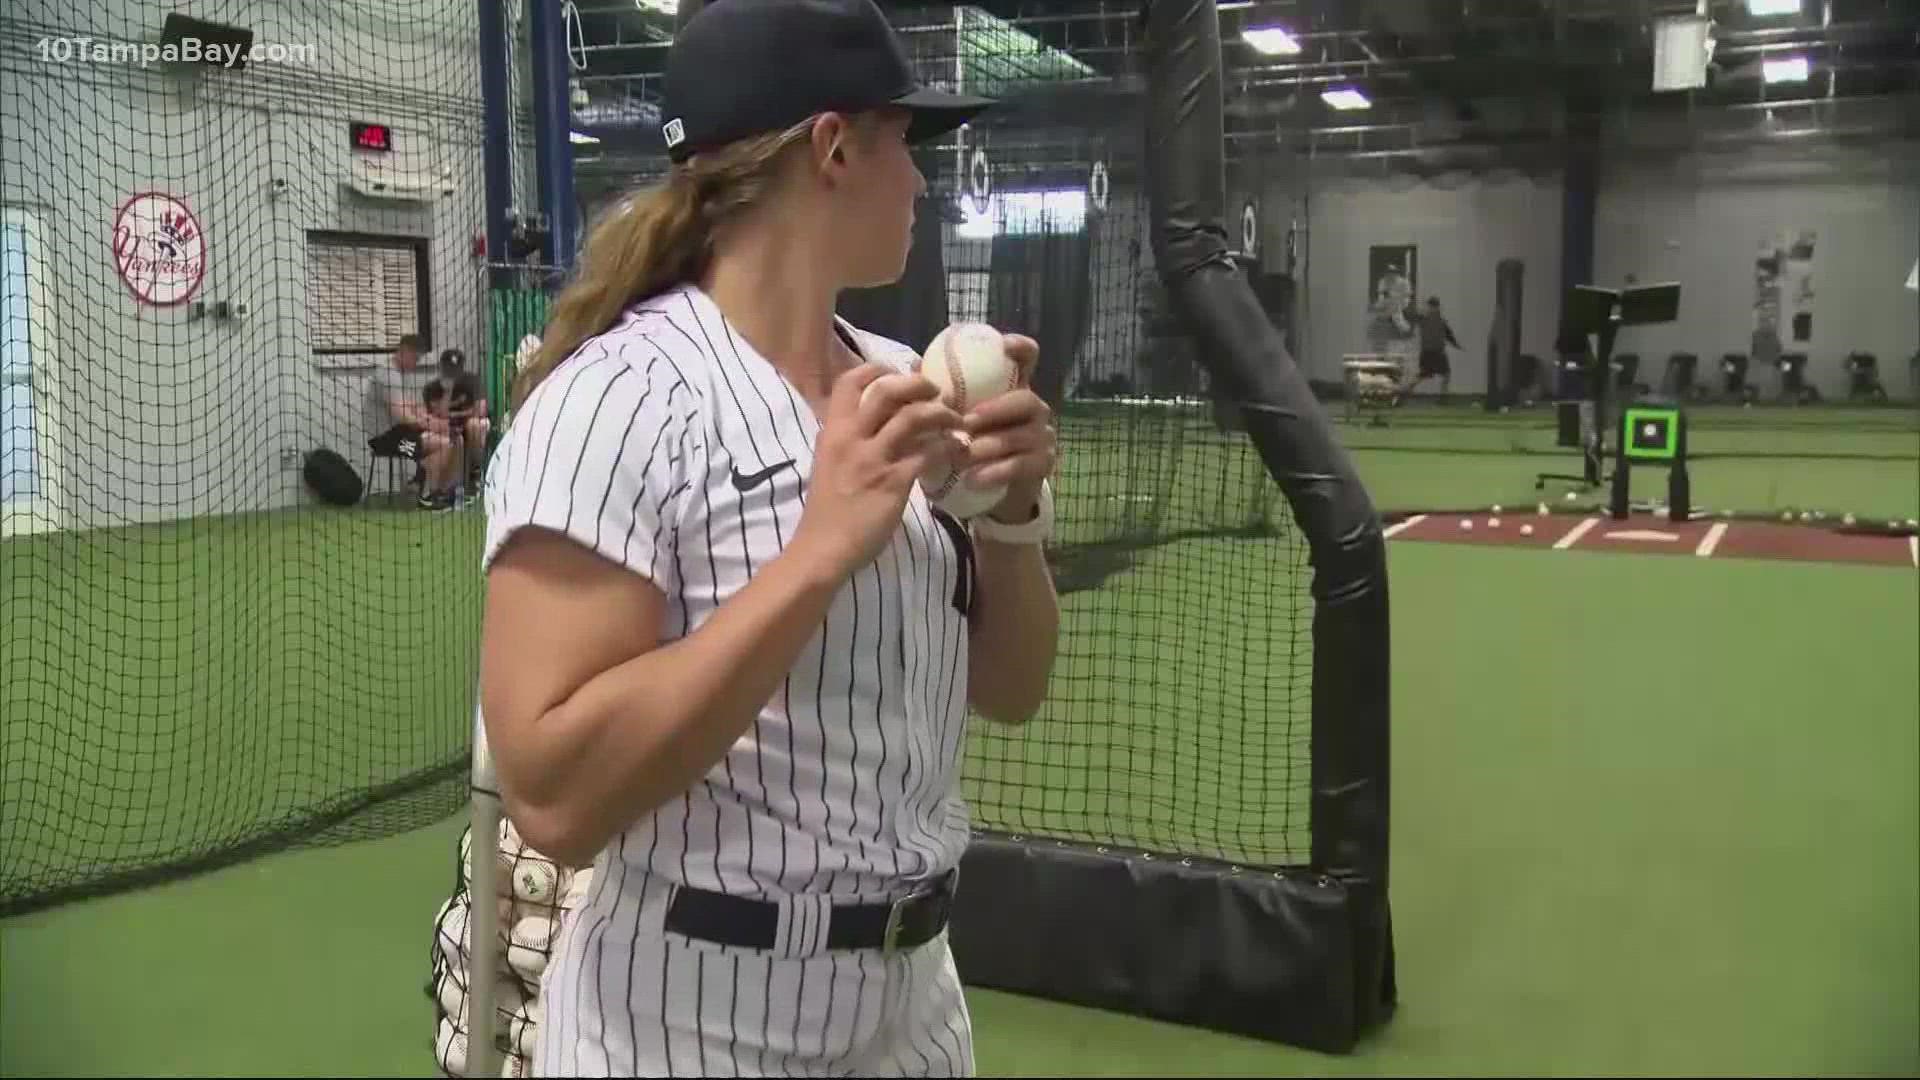 Yankees' Rachel Balkovec to be 1st female manager in minor league